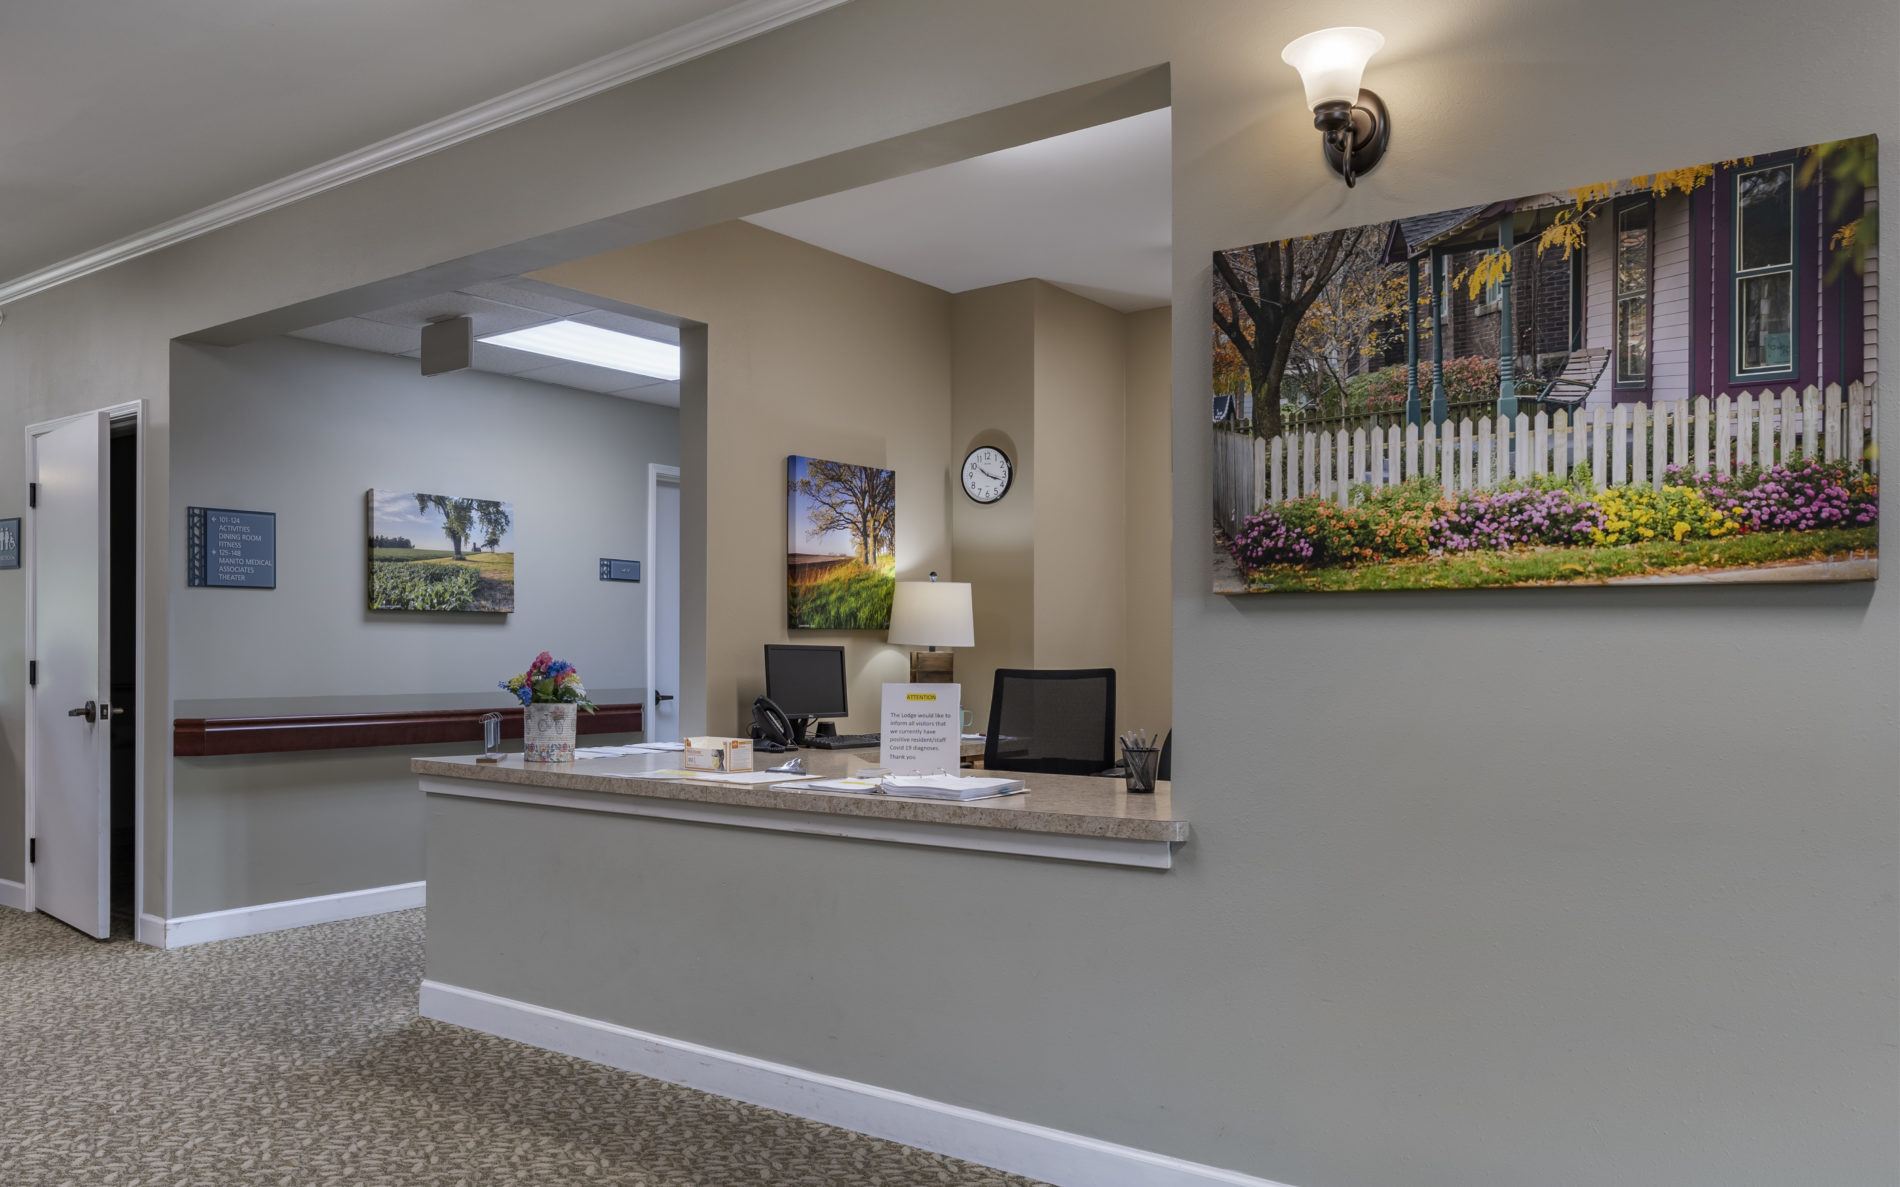 Front desk area with wall art